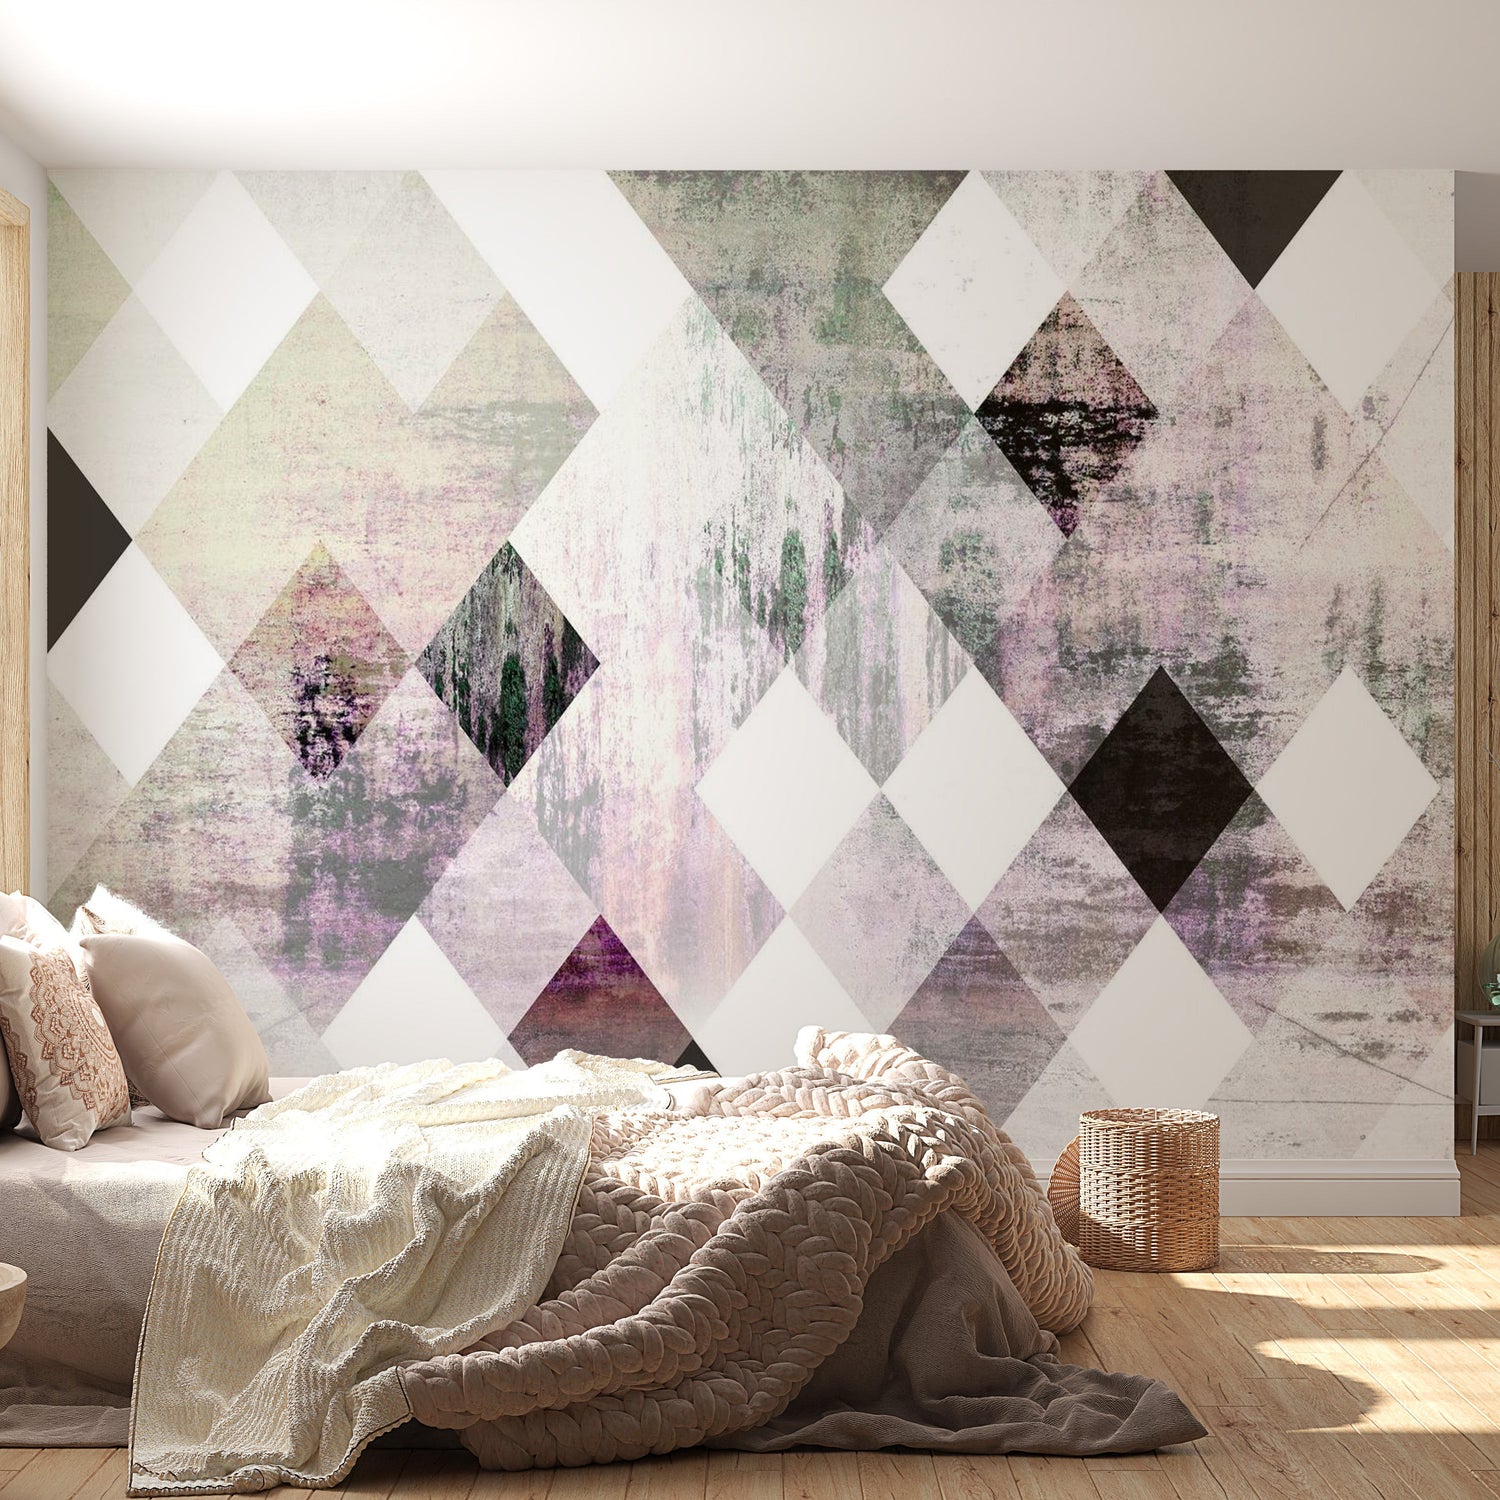 Peel & Stick Wall Mural - Pink Geometric Vintage Concrete Pattern - Removable Wall Decals